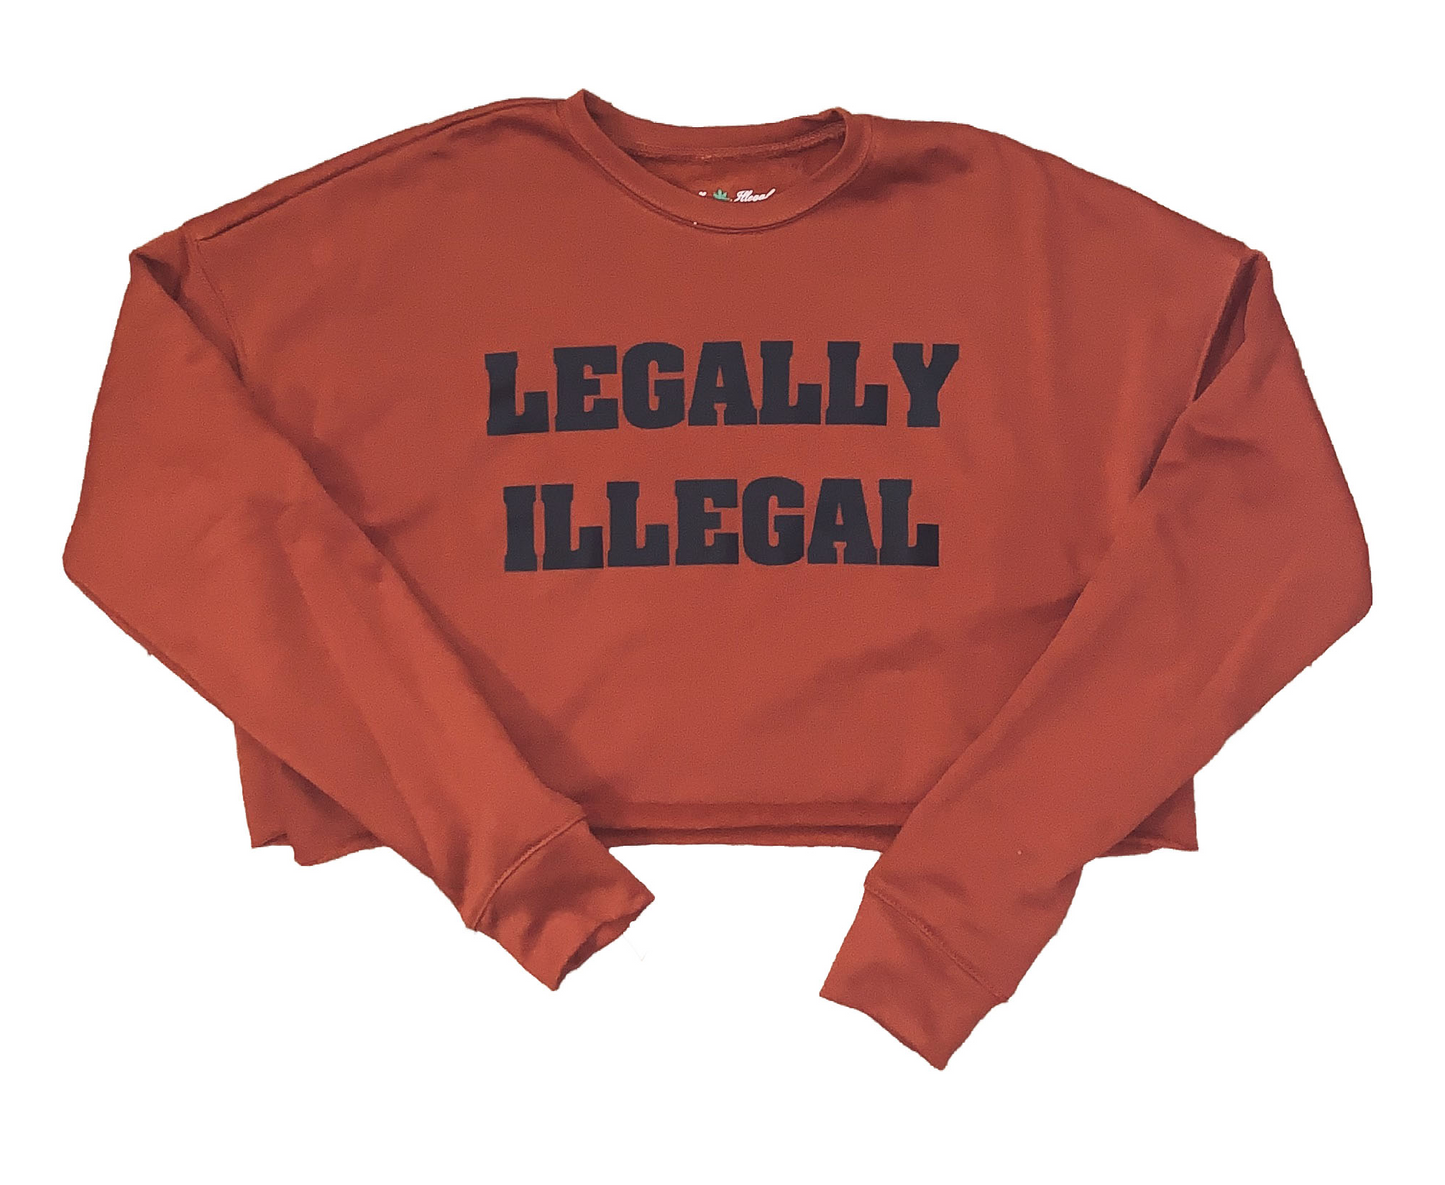 Legally Illegal Cropped Sweater